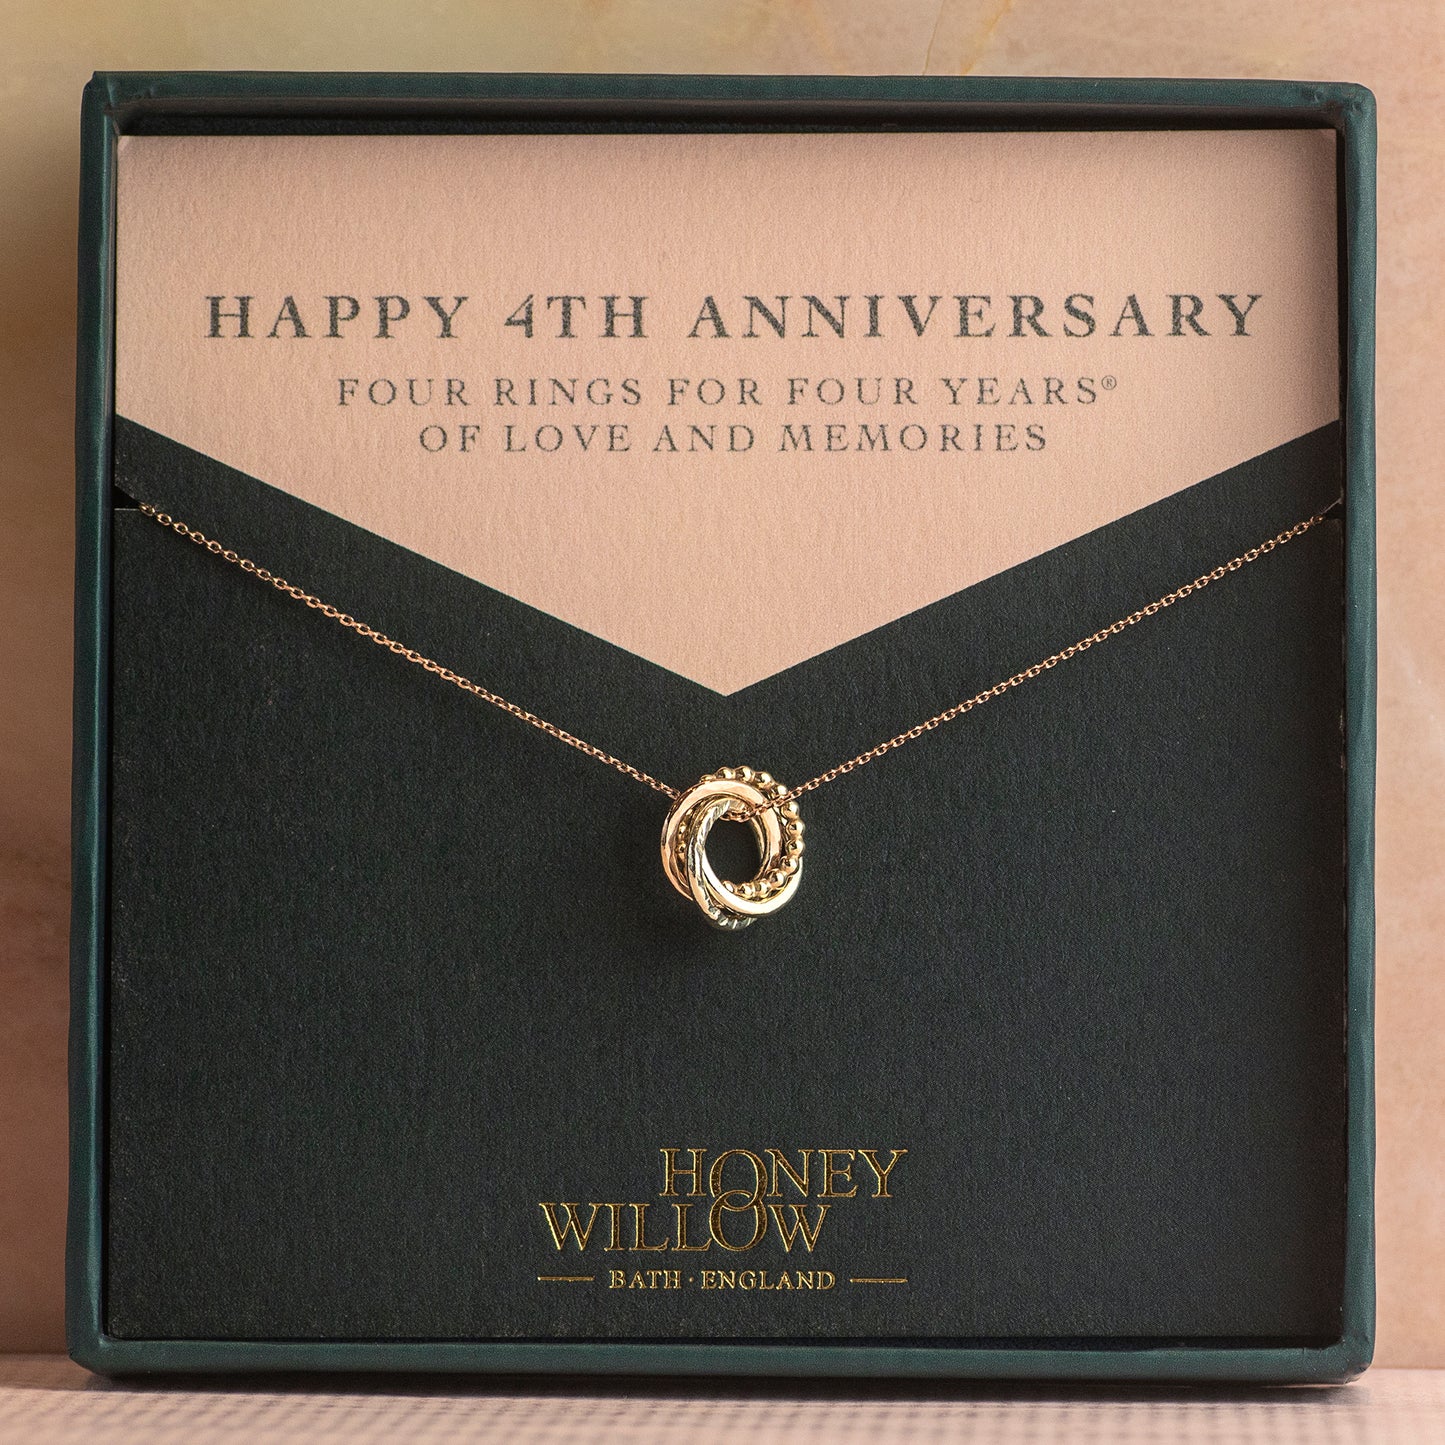 9kt Gold 4th Anniversary Love Knot Necklace -  The Original 4 Links for 4 Years Necklace - Recycled Gold, Rose Gold & White Gold